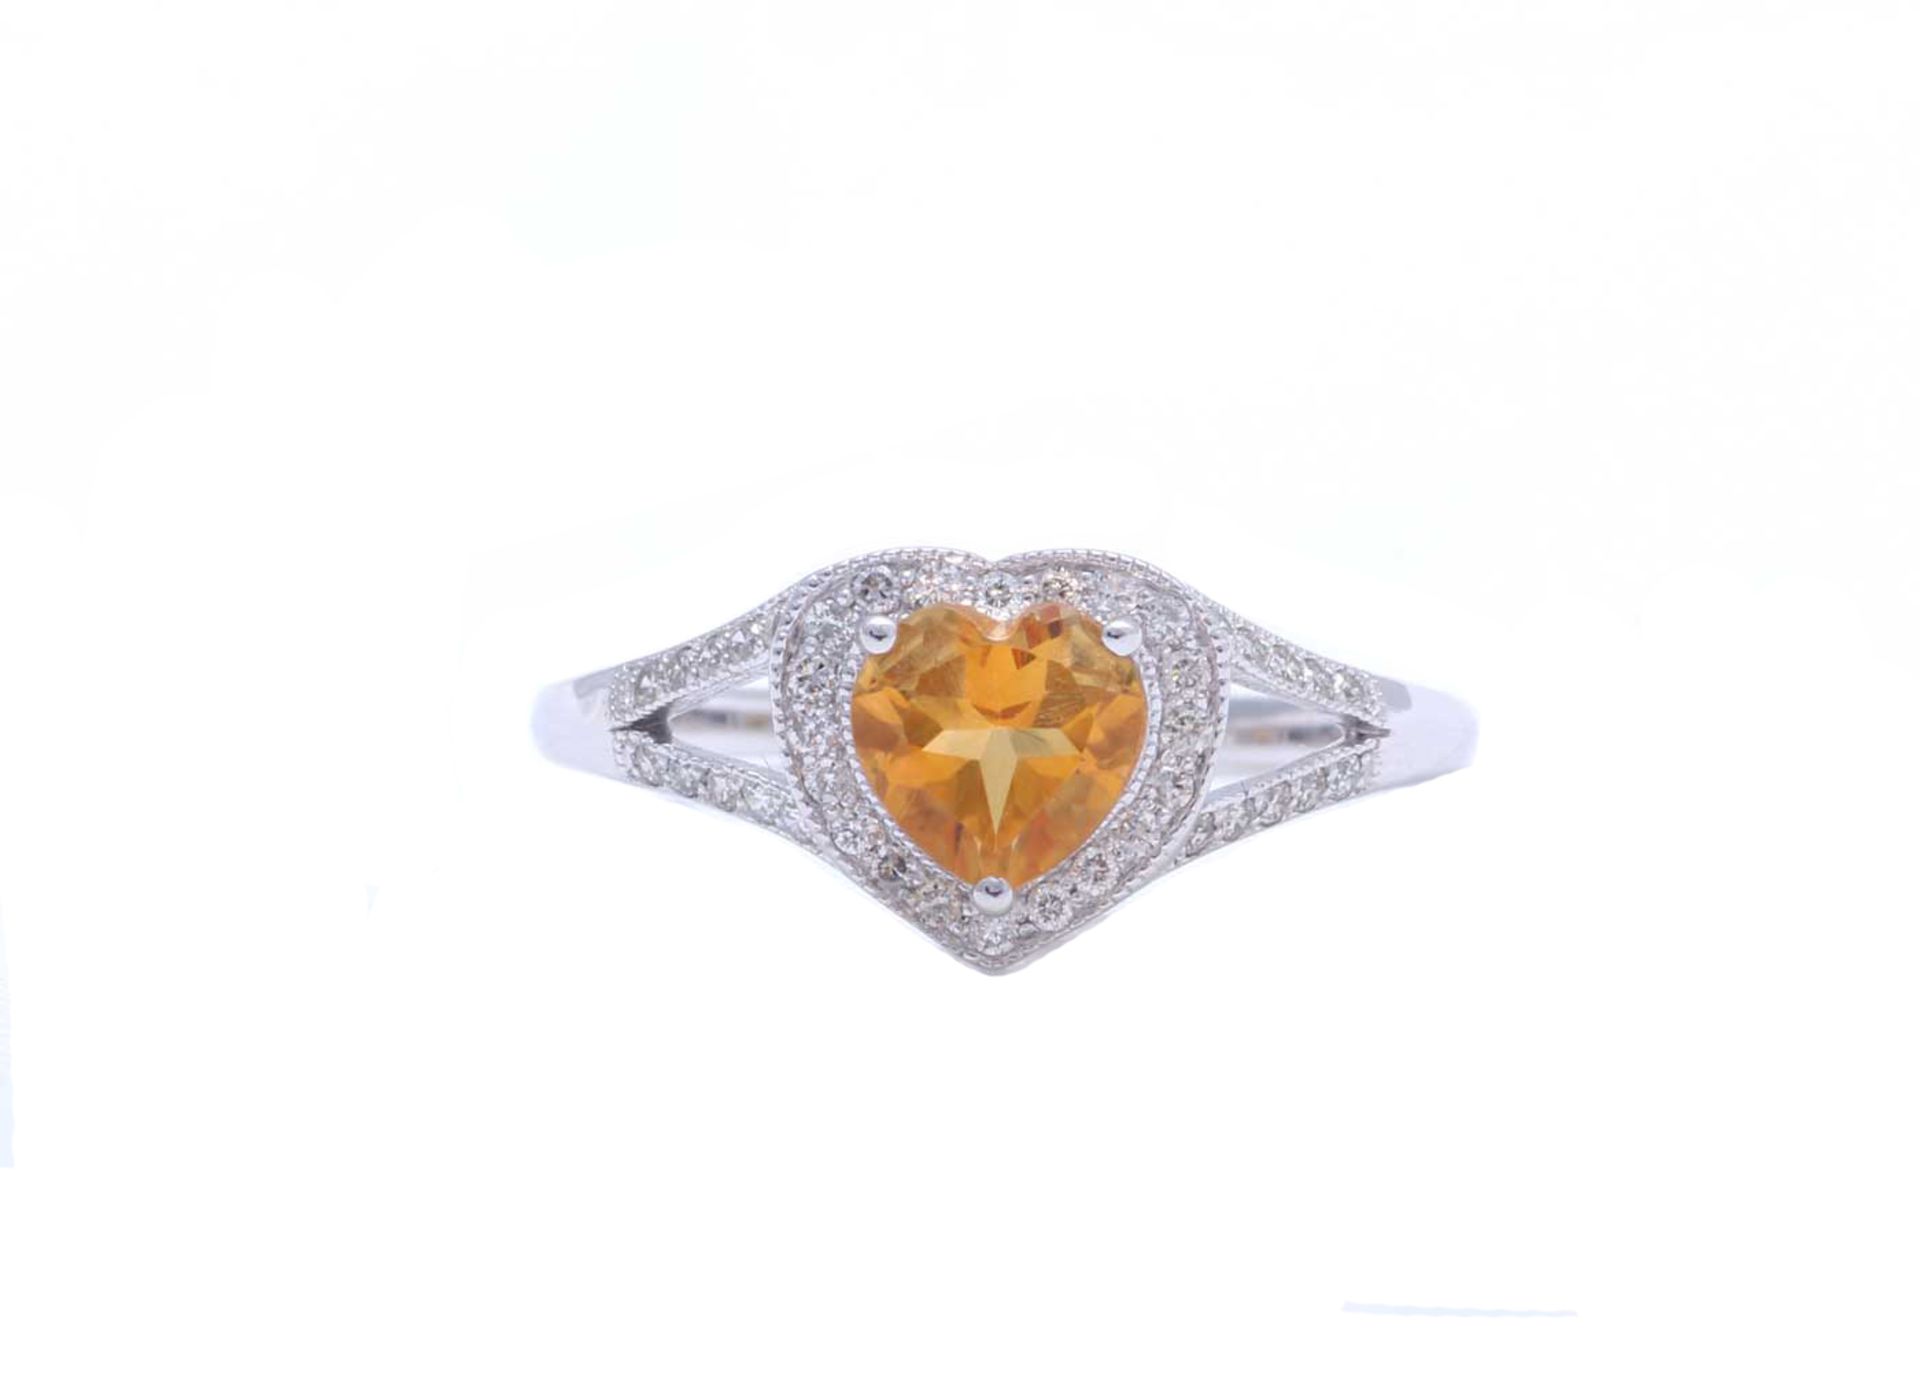 9ct White Gold Heart Shape Citrine Diamond Ring 0.20 Carats - Valued by GIE £2,445.00 - 9ct White